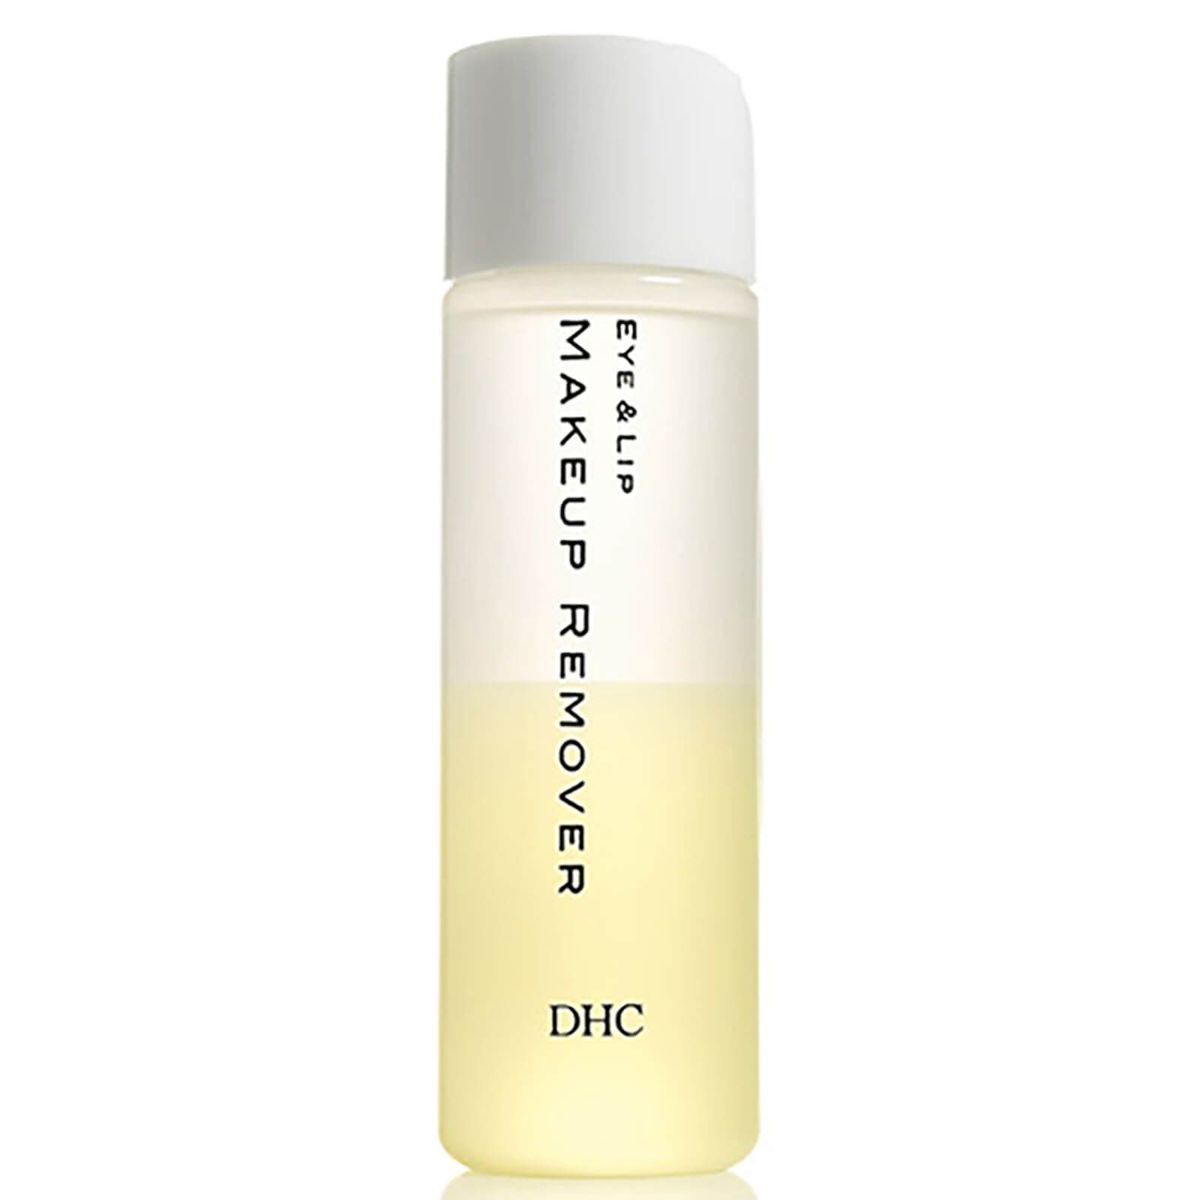 DHC Eye & Lip Makeup Remover